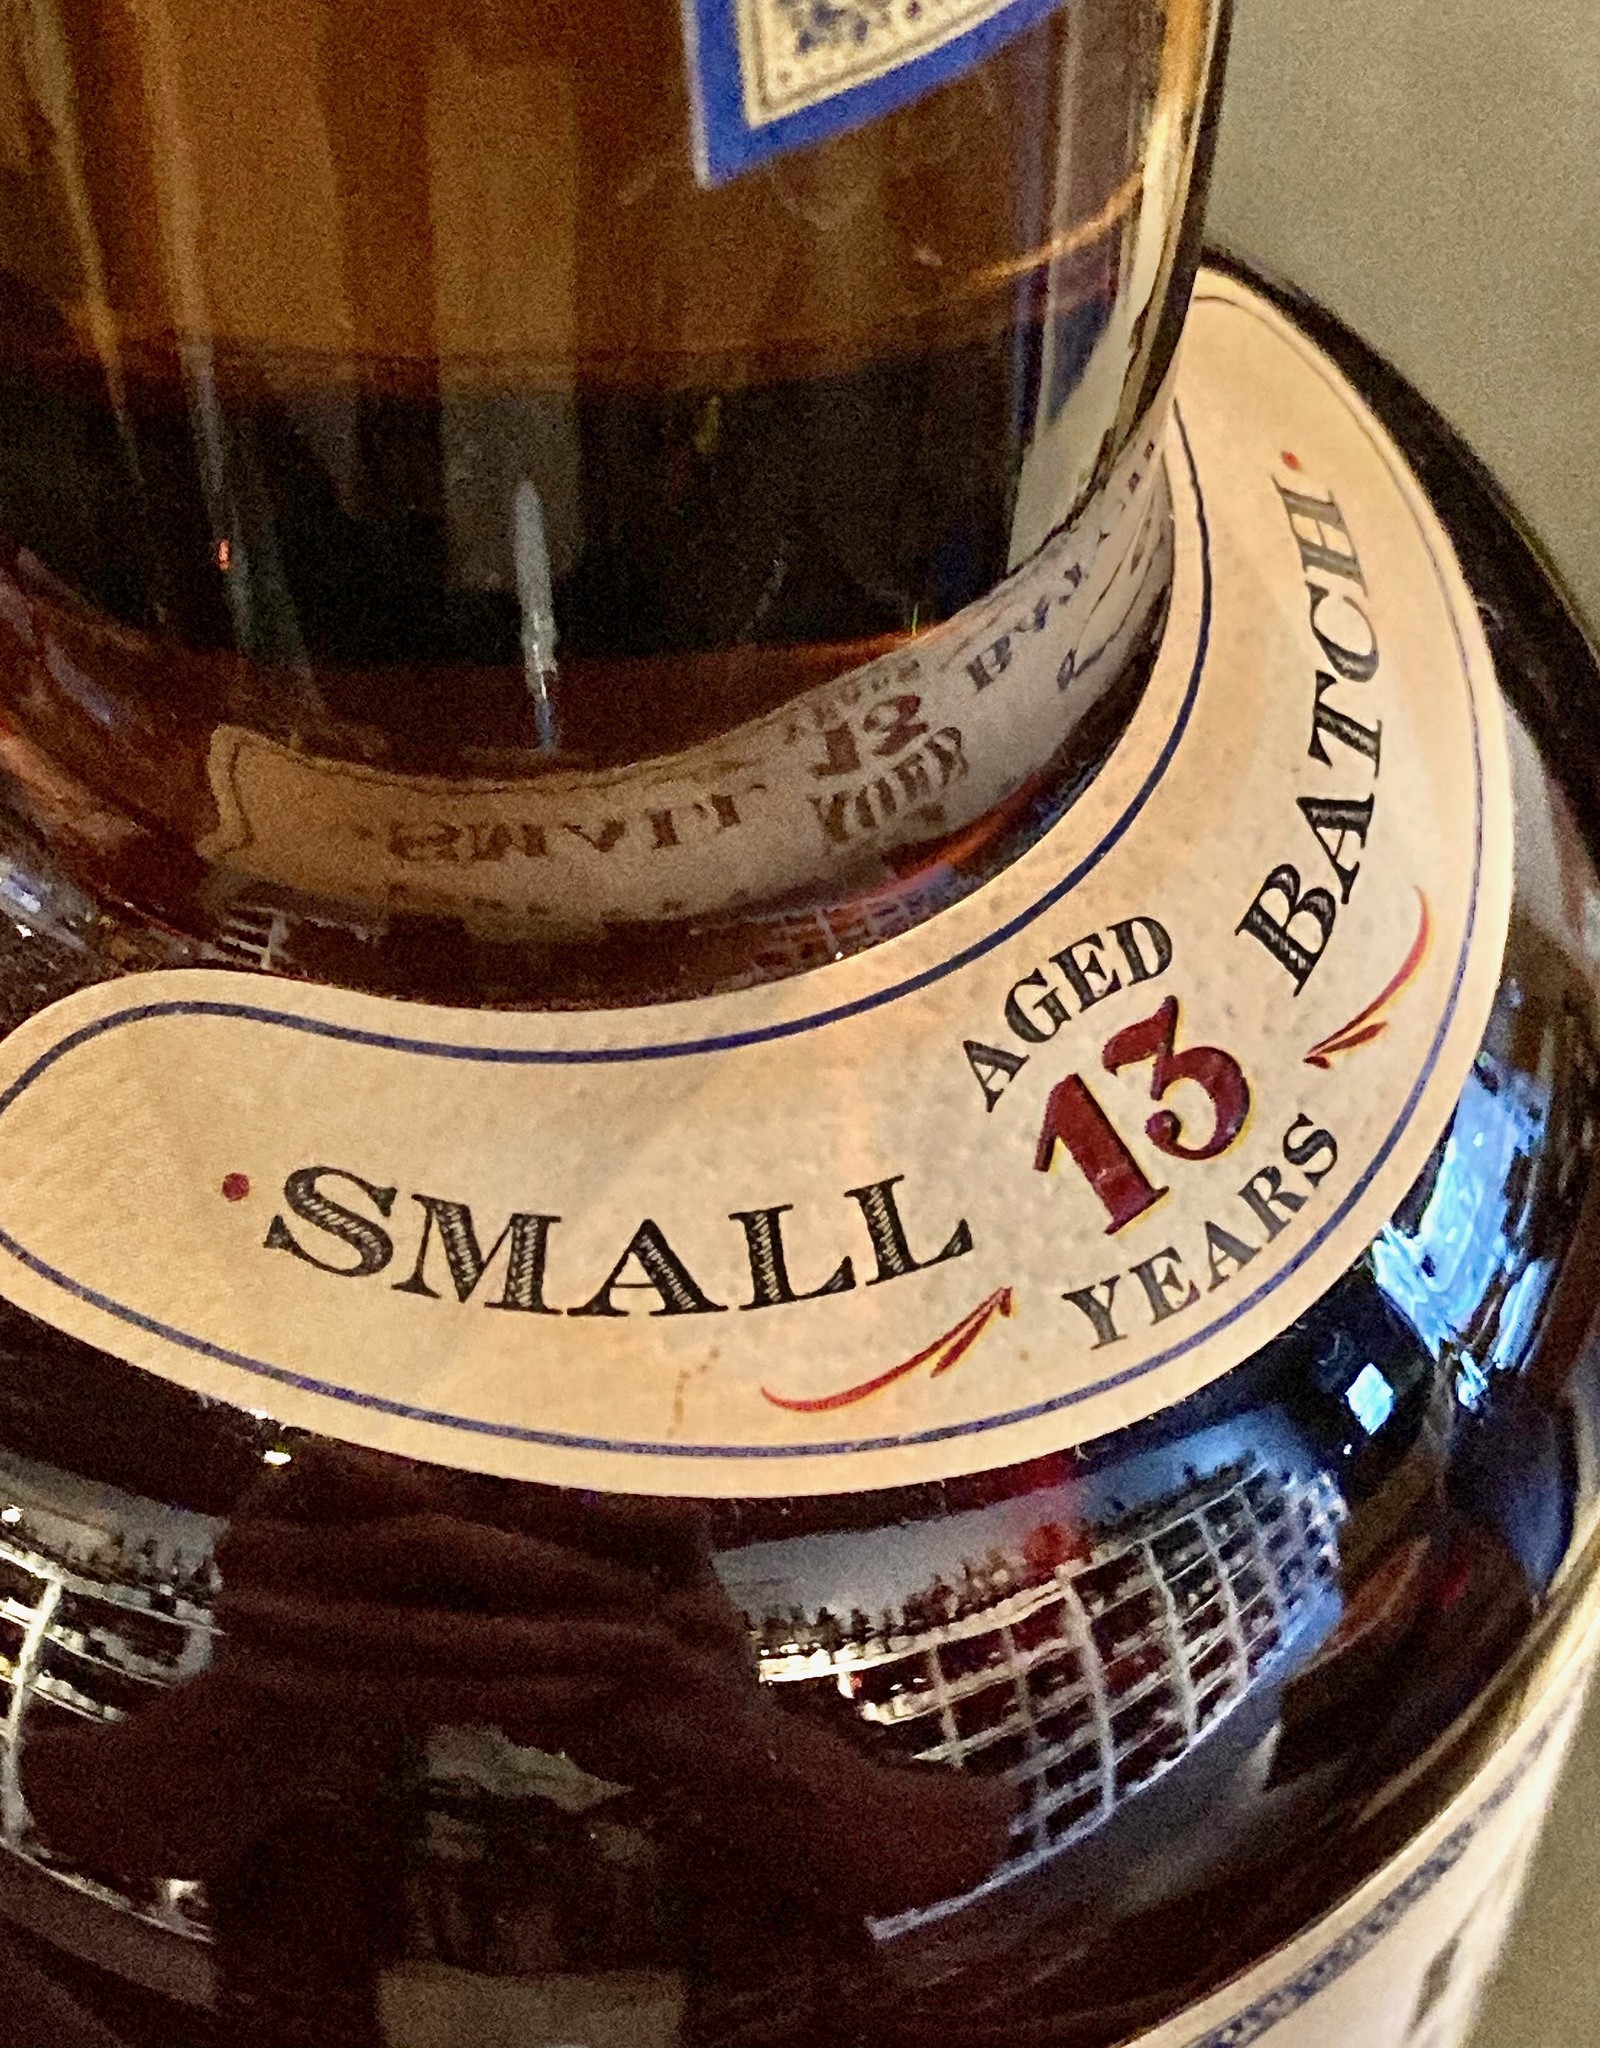 Straight American Whiskey, 13 Year Old, Small Batch #5, Old Carter